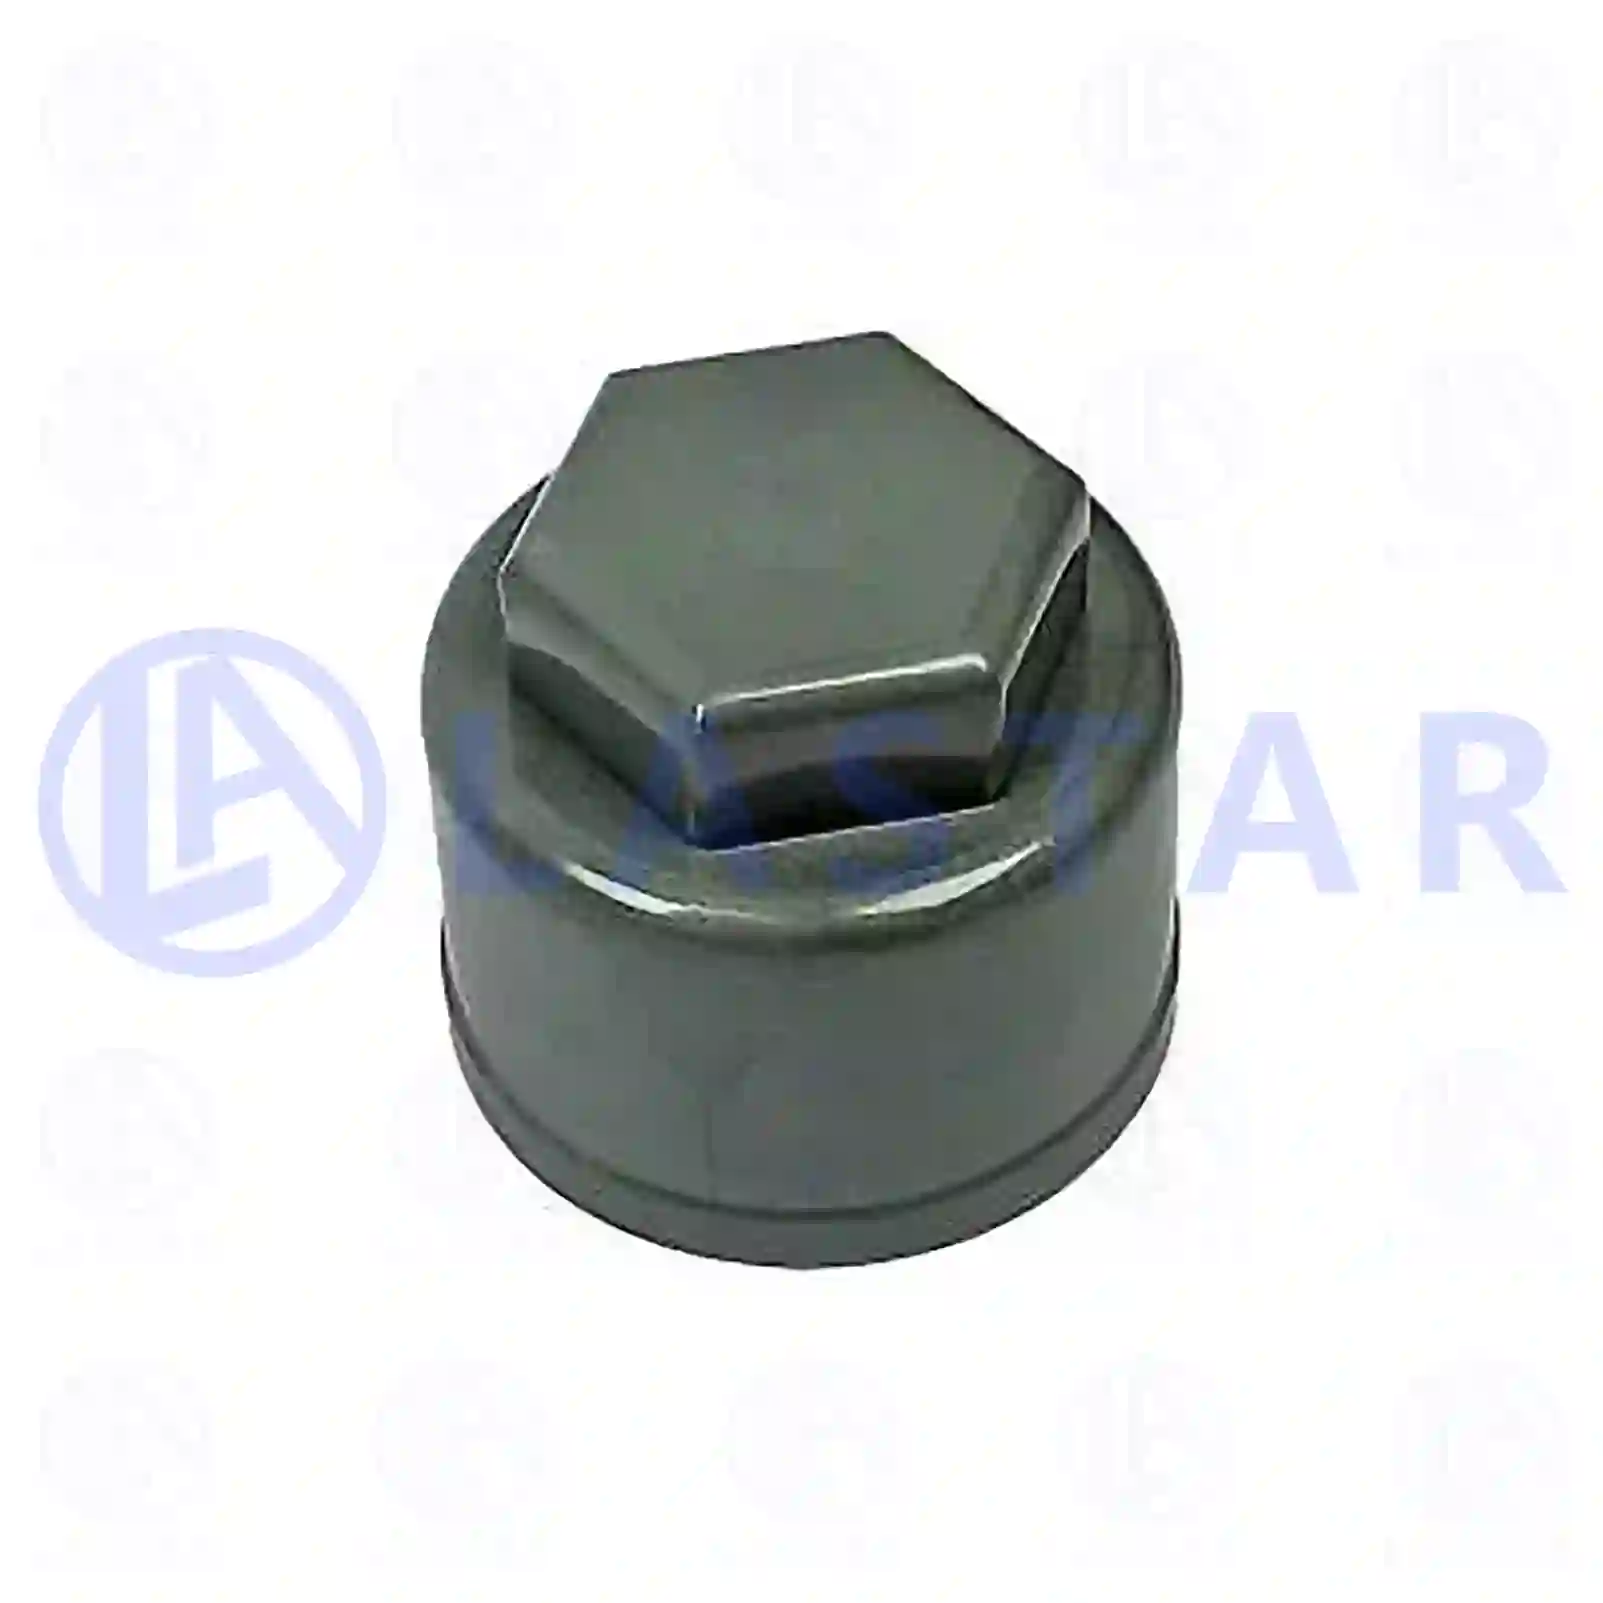 Wheel nut cover, 77726264, 4010024 ||  77726264 Lastar Spare Part | Truck Spare Parts, Auotomotive Spare Parts Wheel nut cover, 77726264, 4010024 ||  77726264 Lastar Spare Part | Truck Spare Parts, Auotomotive Spare Parts